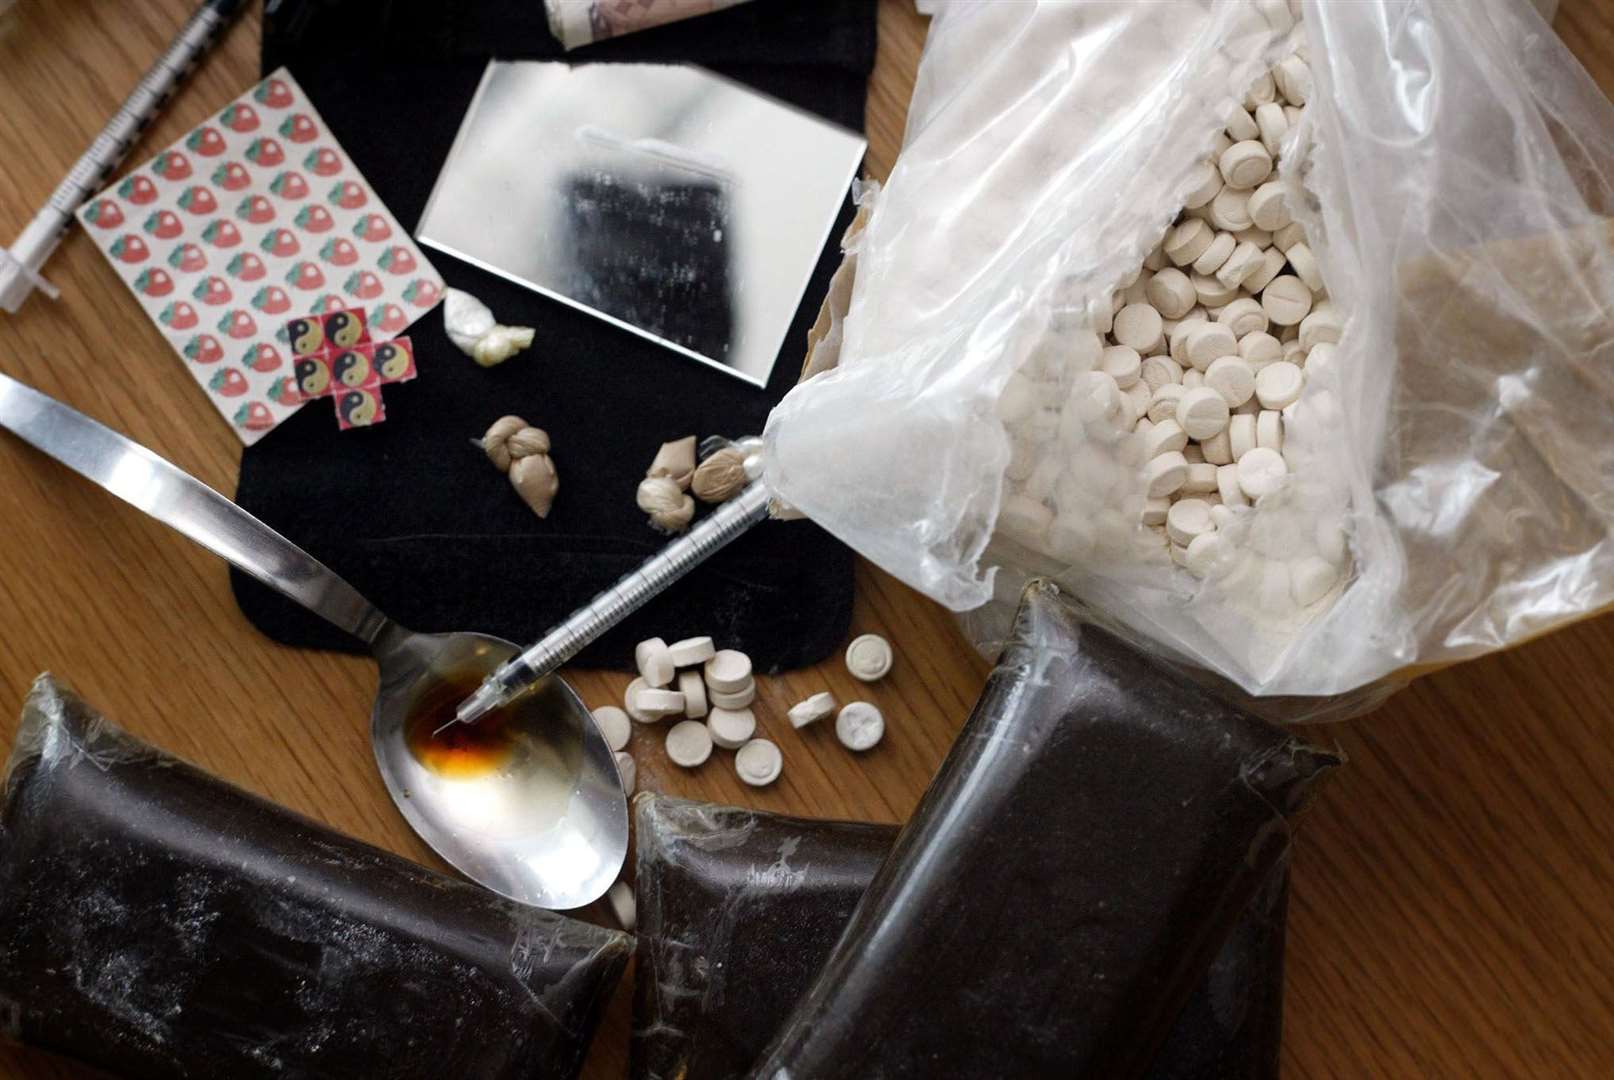 A teenager has been arrested after he was found with suspected crack cocaine and heroin. Picture: PA Archives/Paul Faith